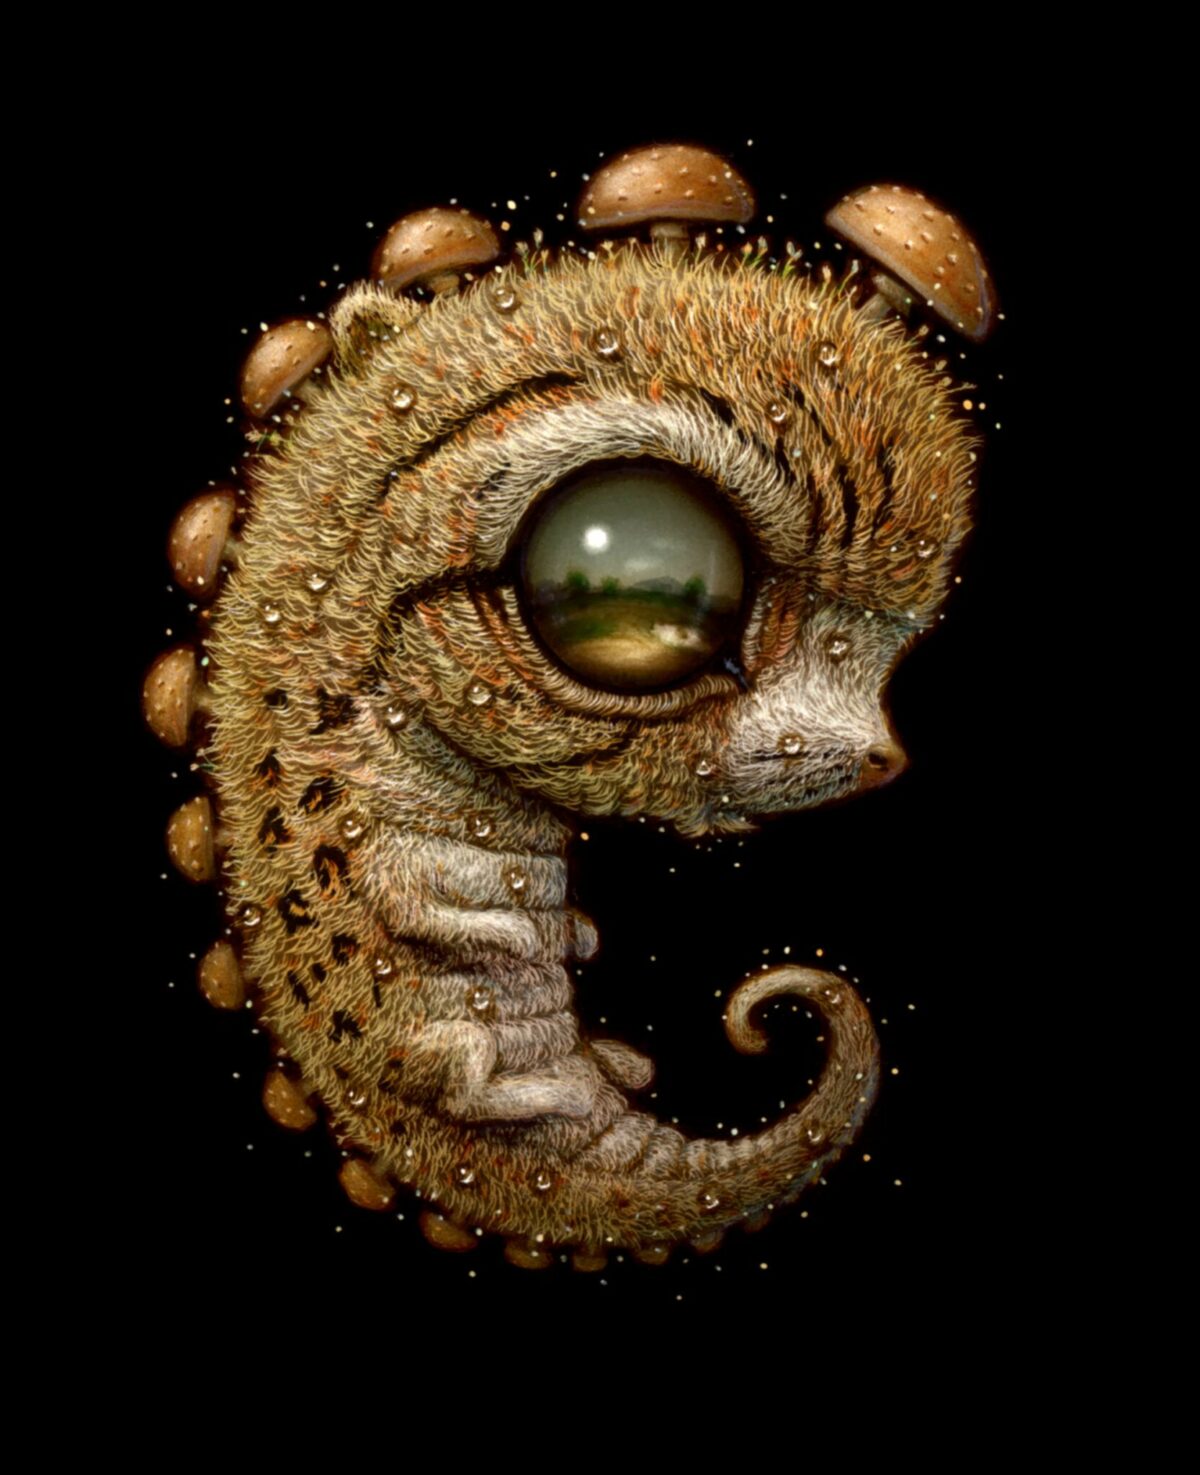 Quirky Fantastical Creatures With Oversized Eyes By Haoto Nattori 9